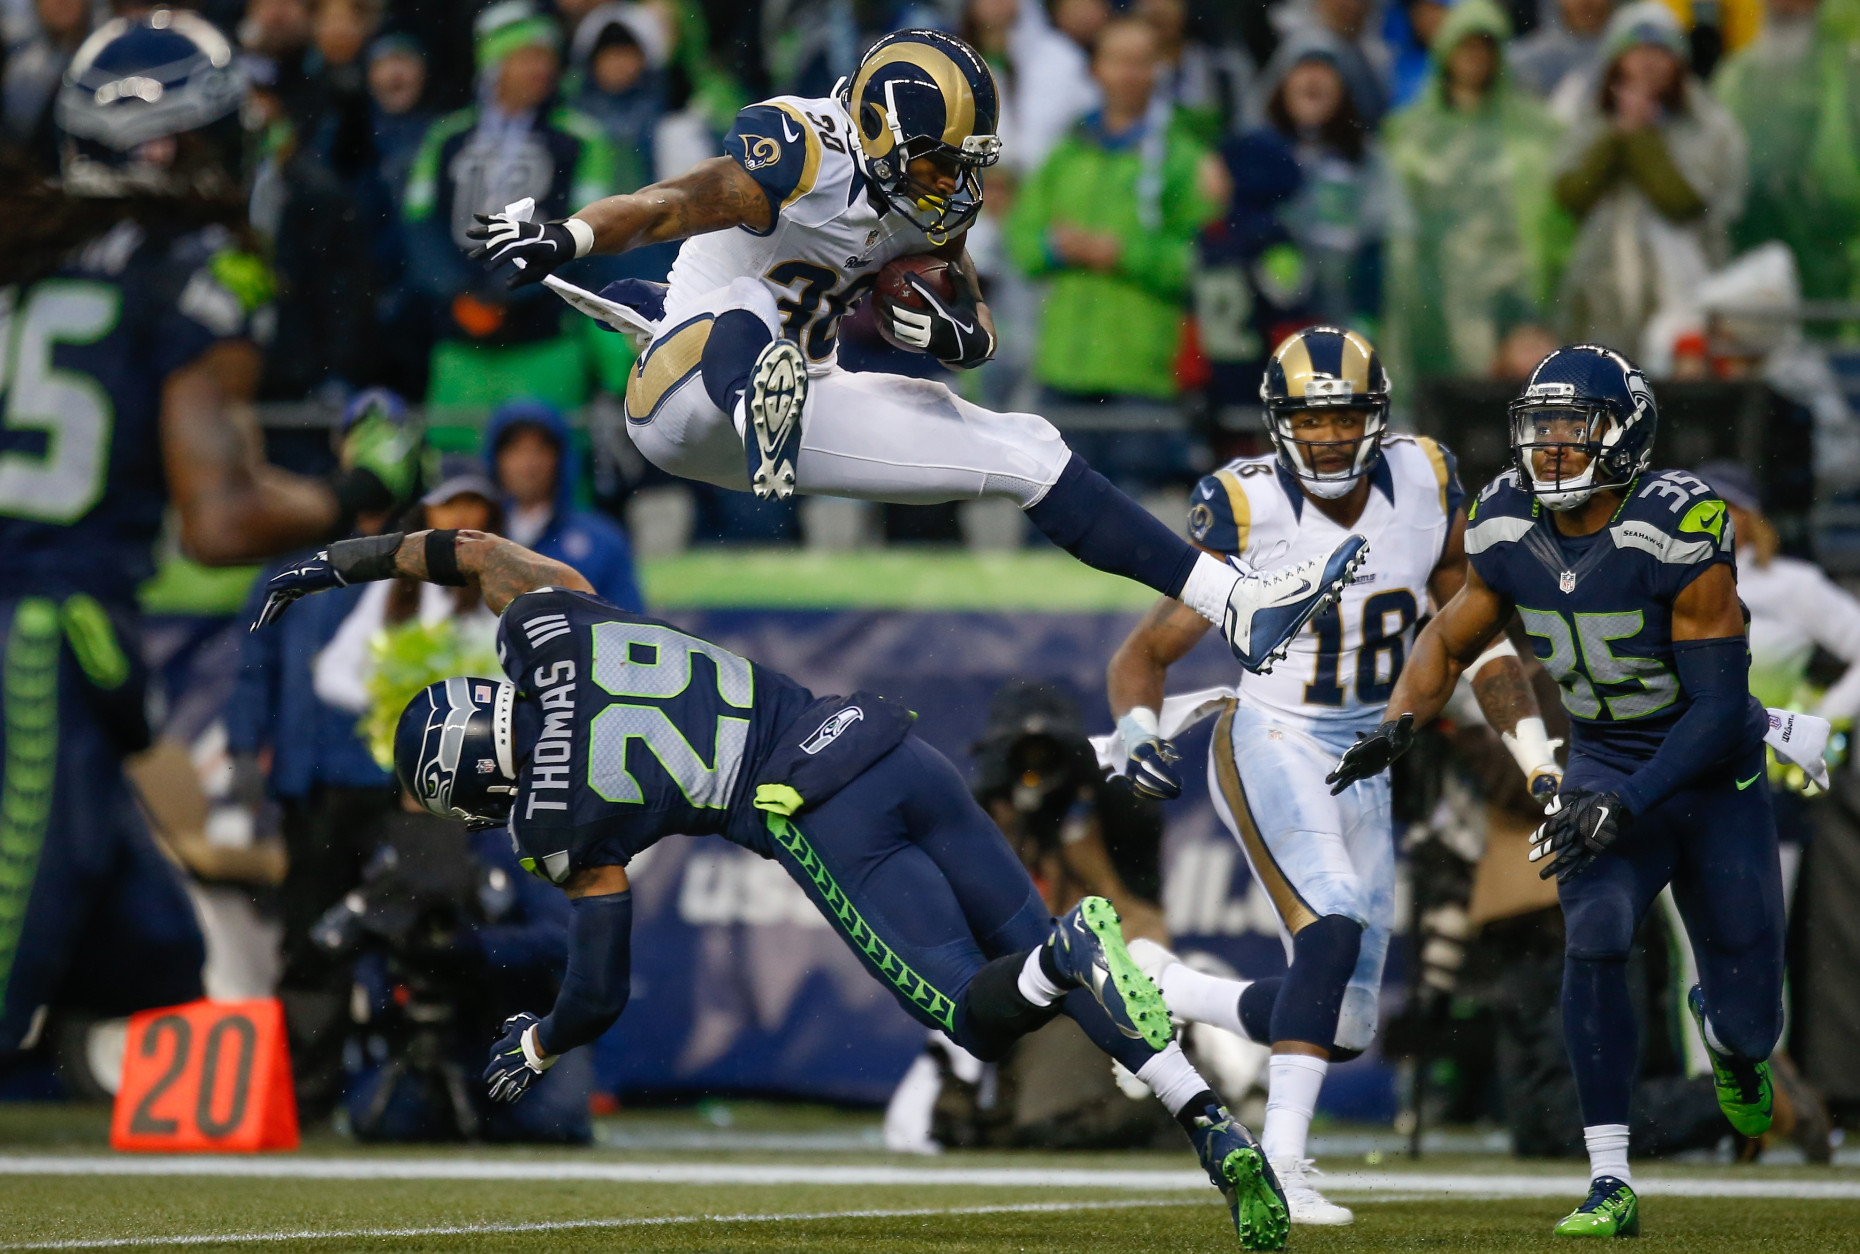 SEATTLE, WA - DECEMBER 27:  Running back Todd Gurley #30 of the St. Louis Rams rushes against free safety Earl Thomas #29 of the Seattle Seahawks at CenturyLink Field on December 27, 2015 in Seattle, Washington. The Rams defeated the Seahawks 23-17. (Photo by Otto Greule Jr/Getty Images)